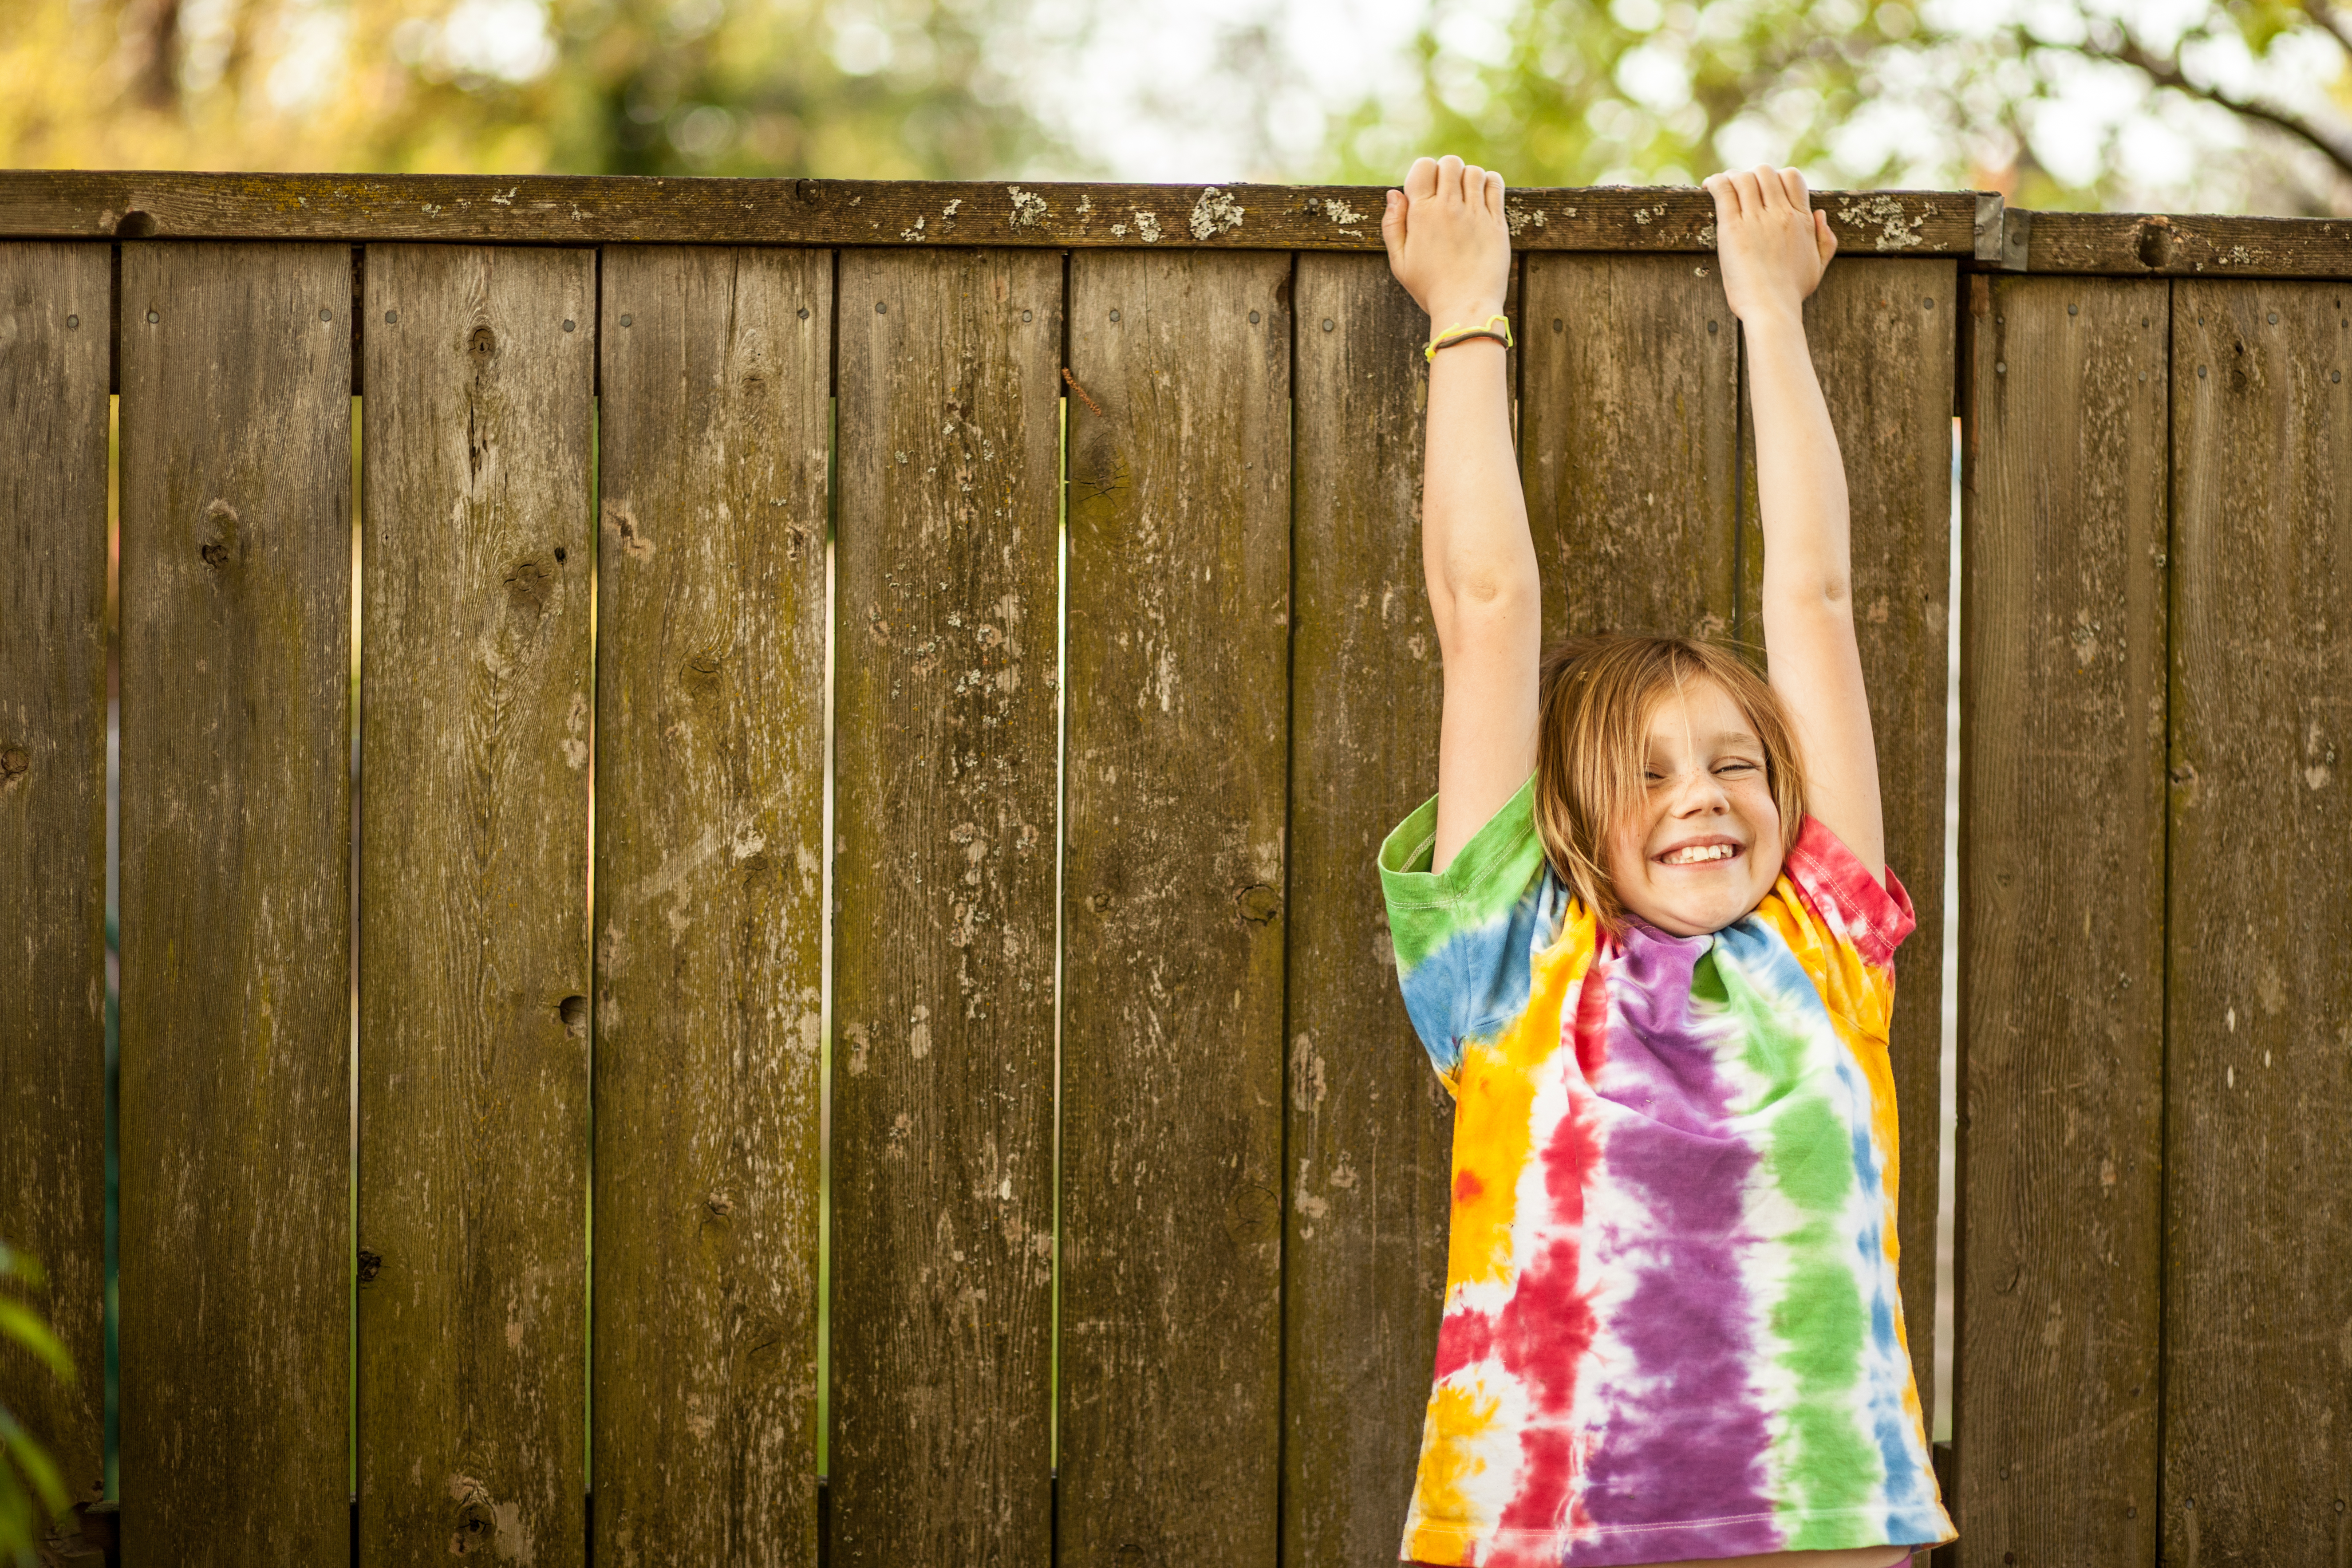 This is a color image of a young girl in a tie dyed T shirt she is smiling and hanging on a fence in her backyard.